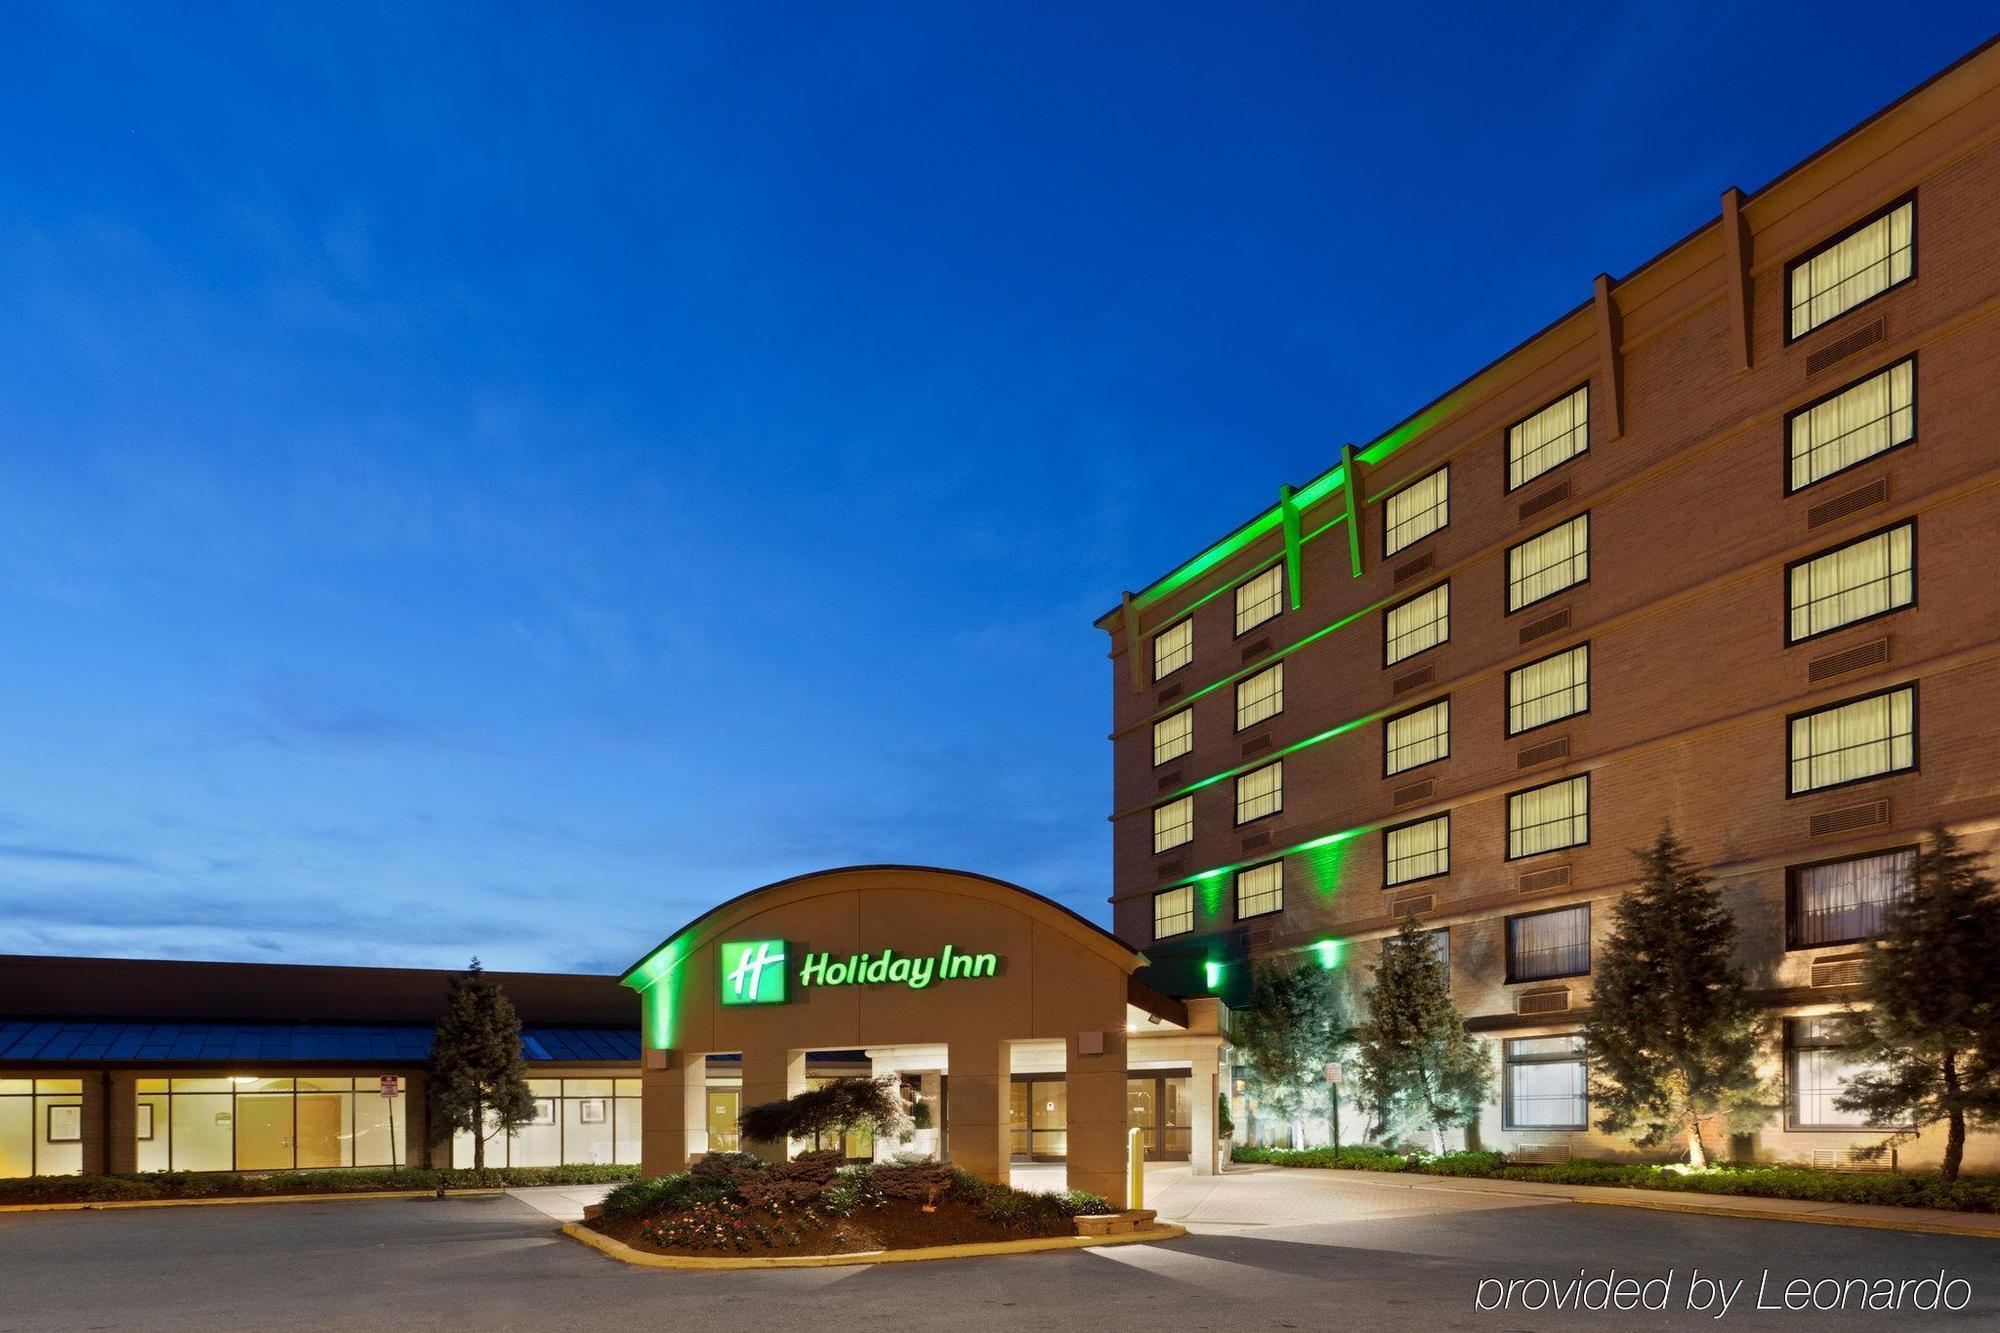 Hotel Doubletree By Hilton Laurel, Md Exterior foto